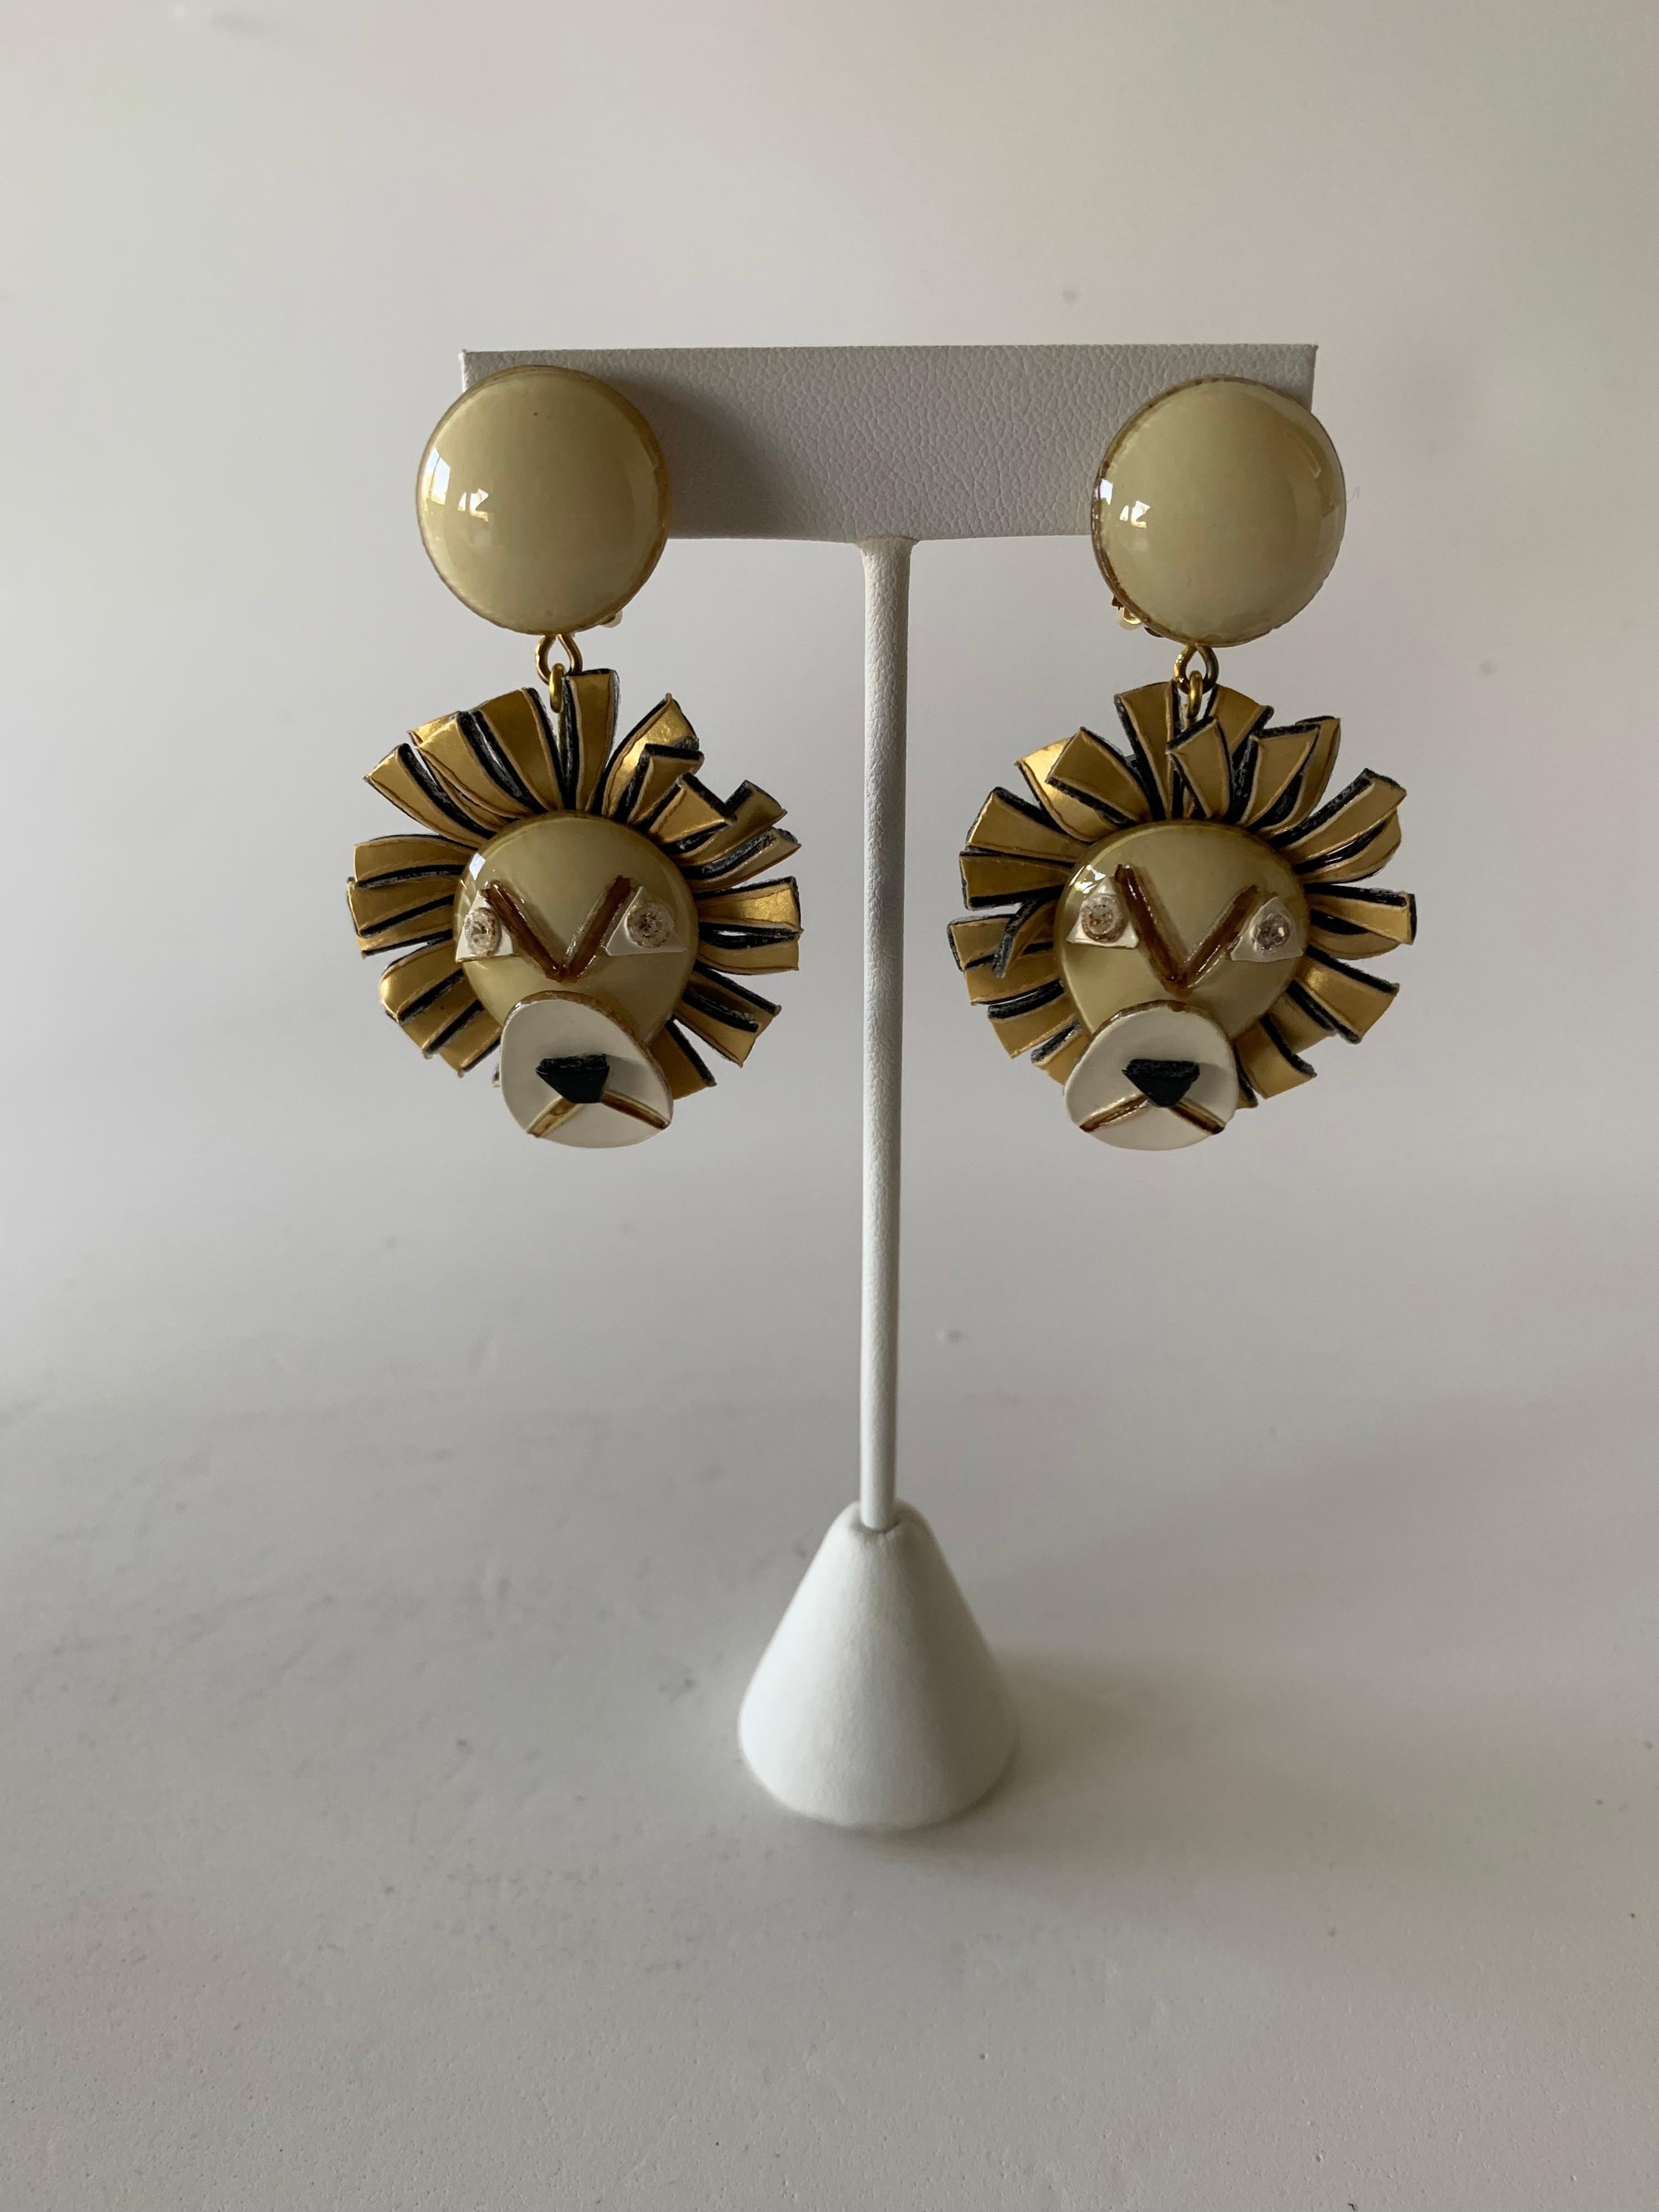 Light and easy to wear, contemporary handmade artisanal clip-on statement earrings were made in Paris by Cilea. The lightweight earrings feature charming lions. The lion's three-dimensional oversized face features bright colors in hues of taupes and